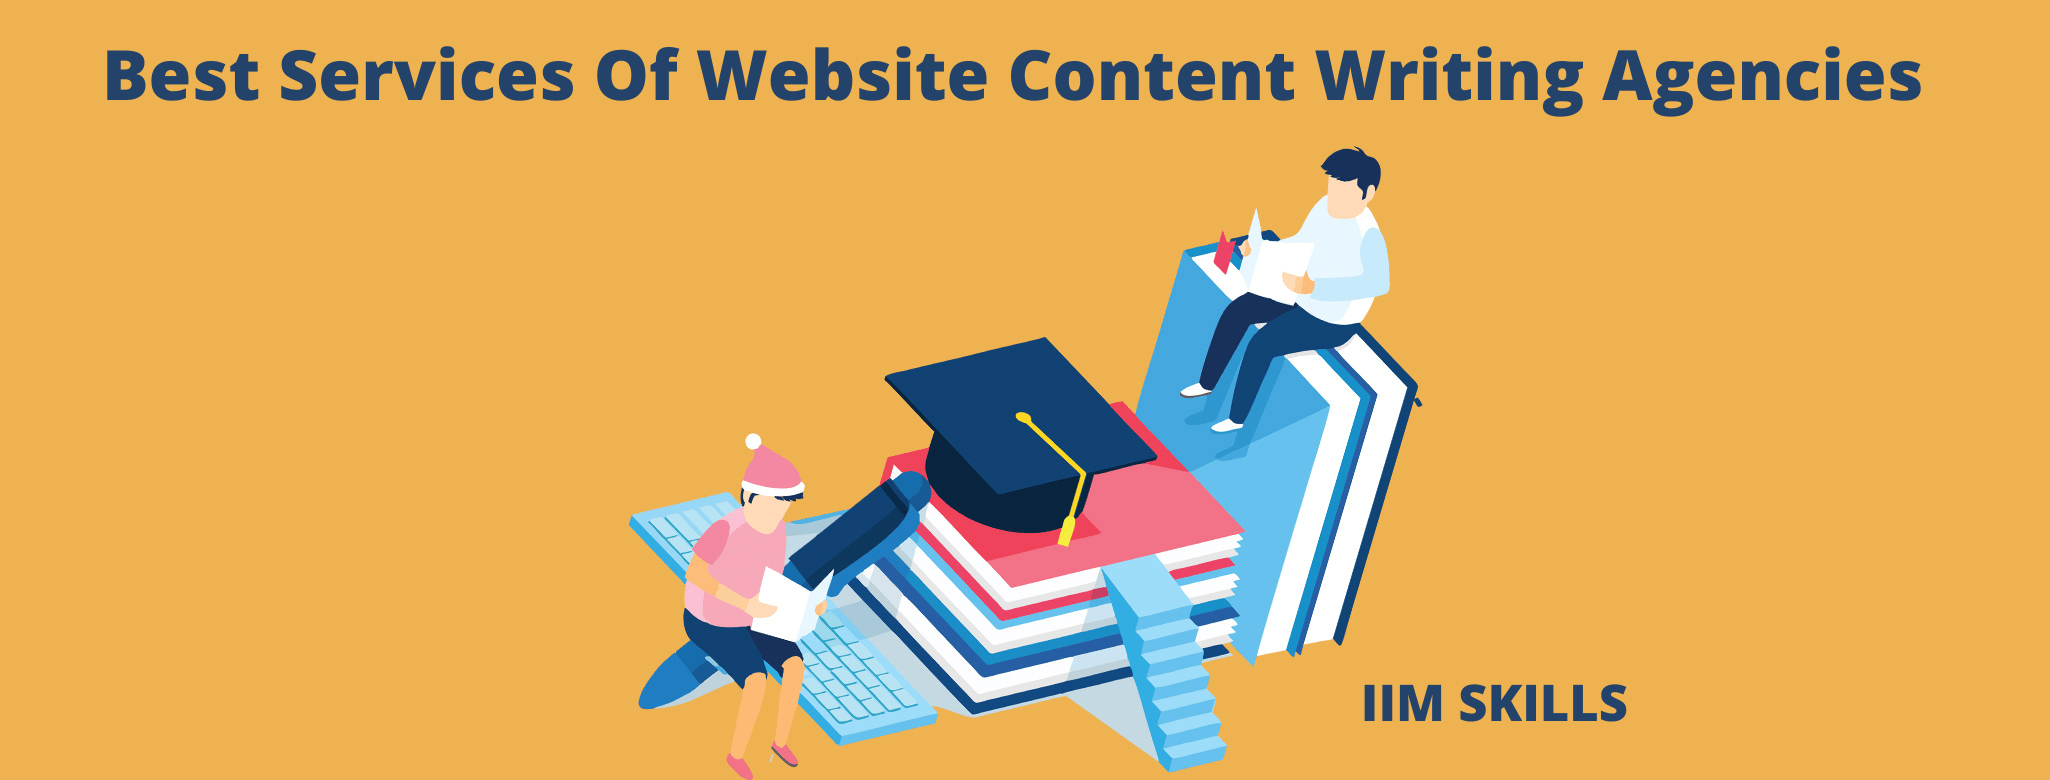 Best Websites For Content Writing